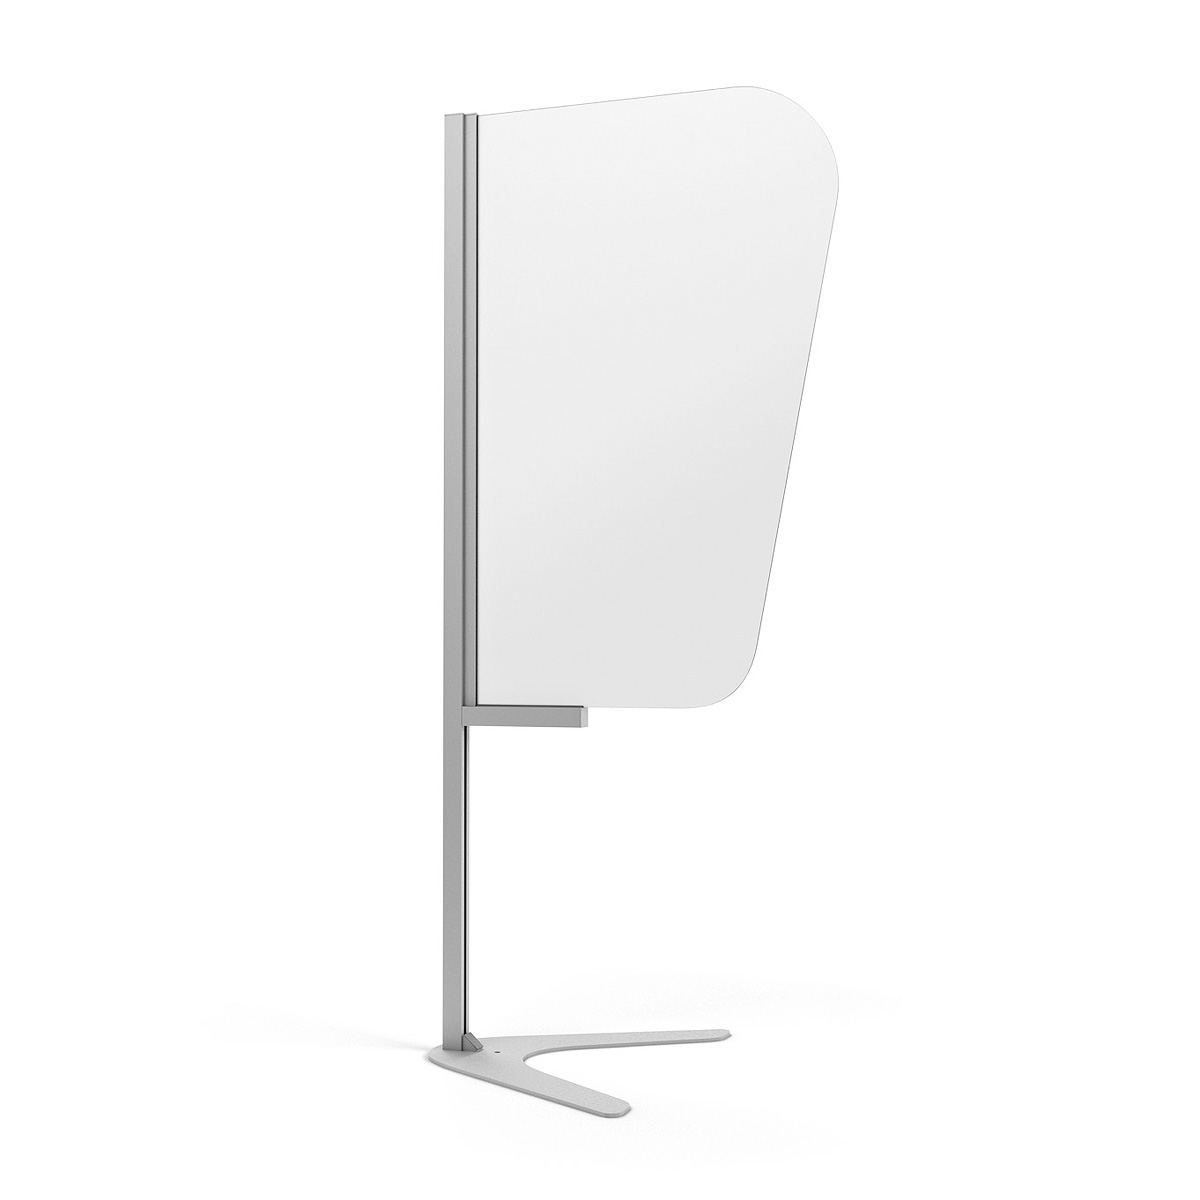 ACHOO® Patient Waiting Room Divider For Separating Waiting Patients - Clear Perspex Surface